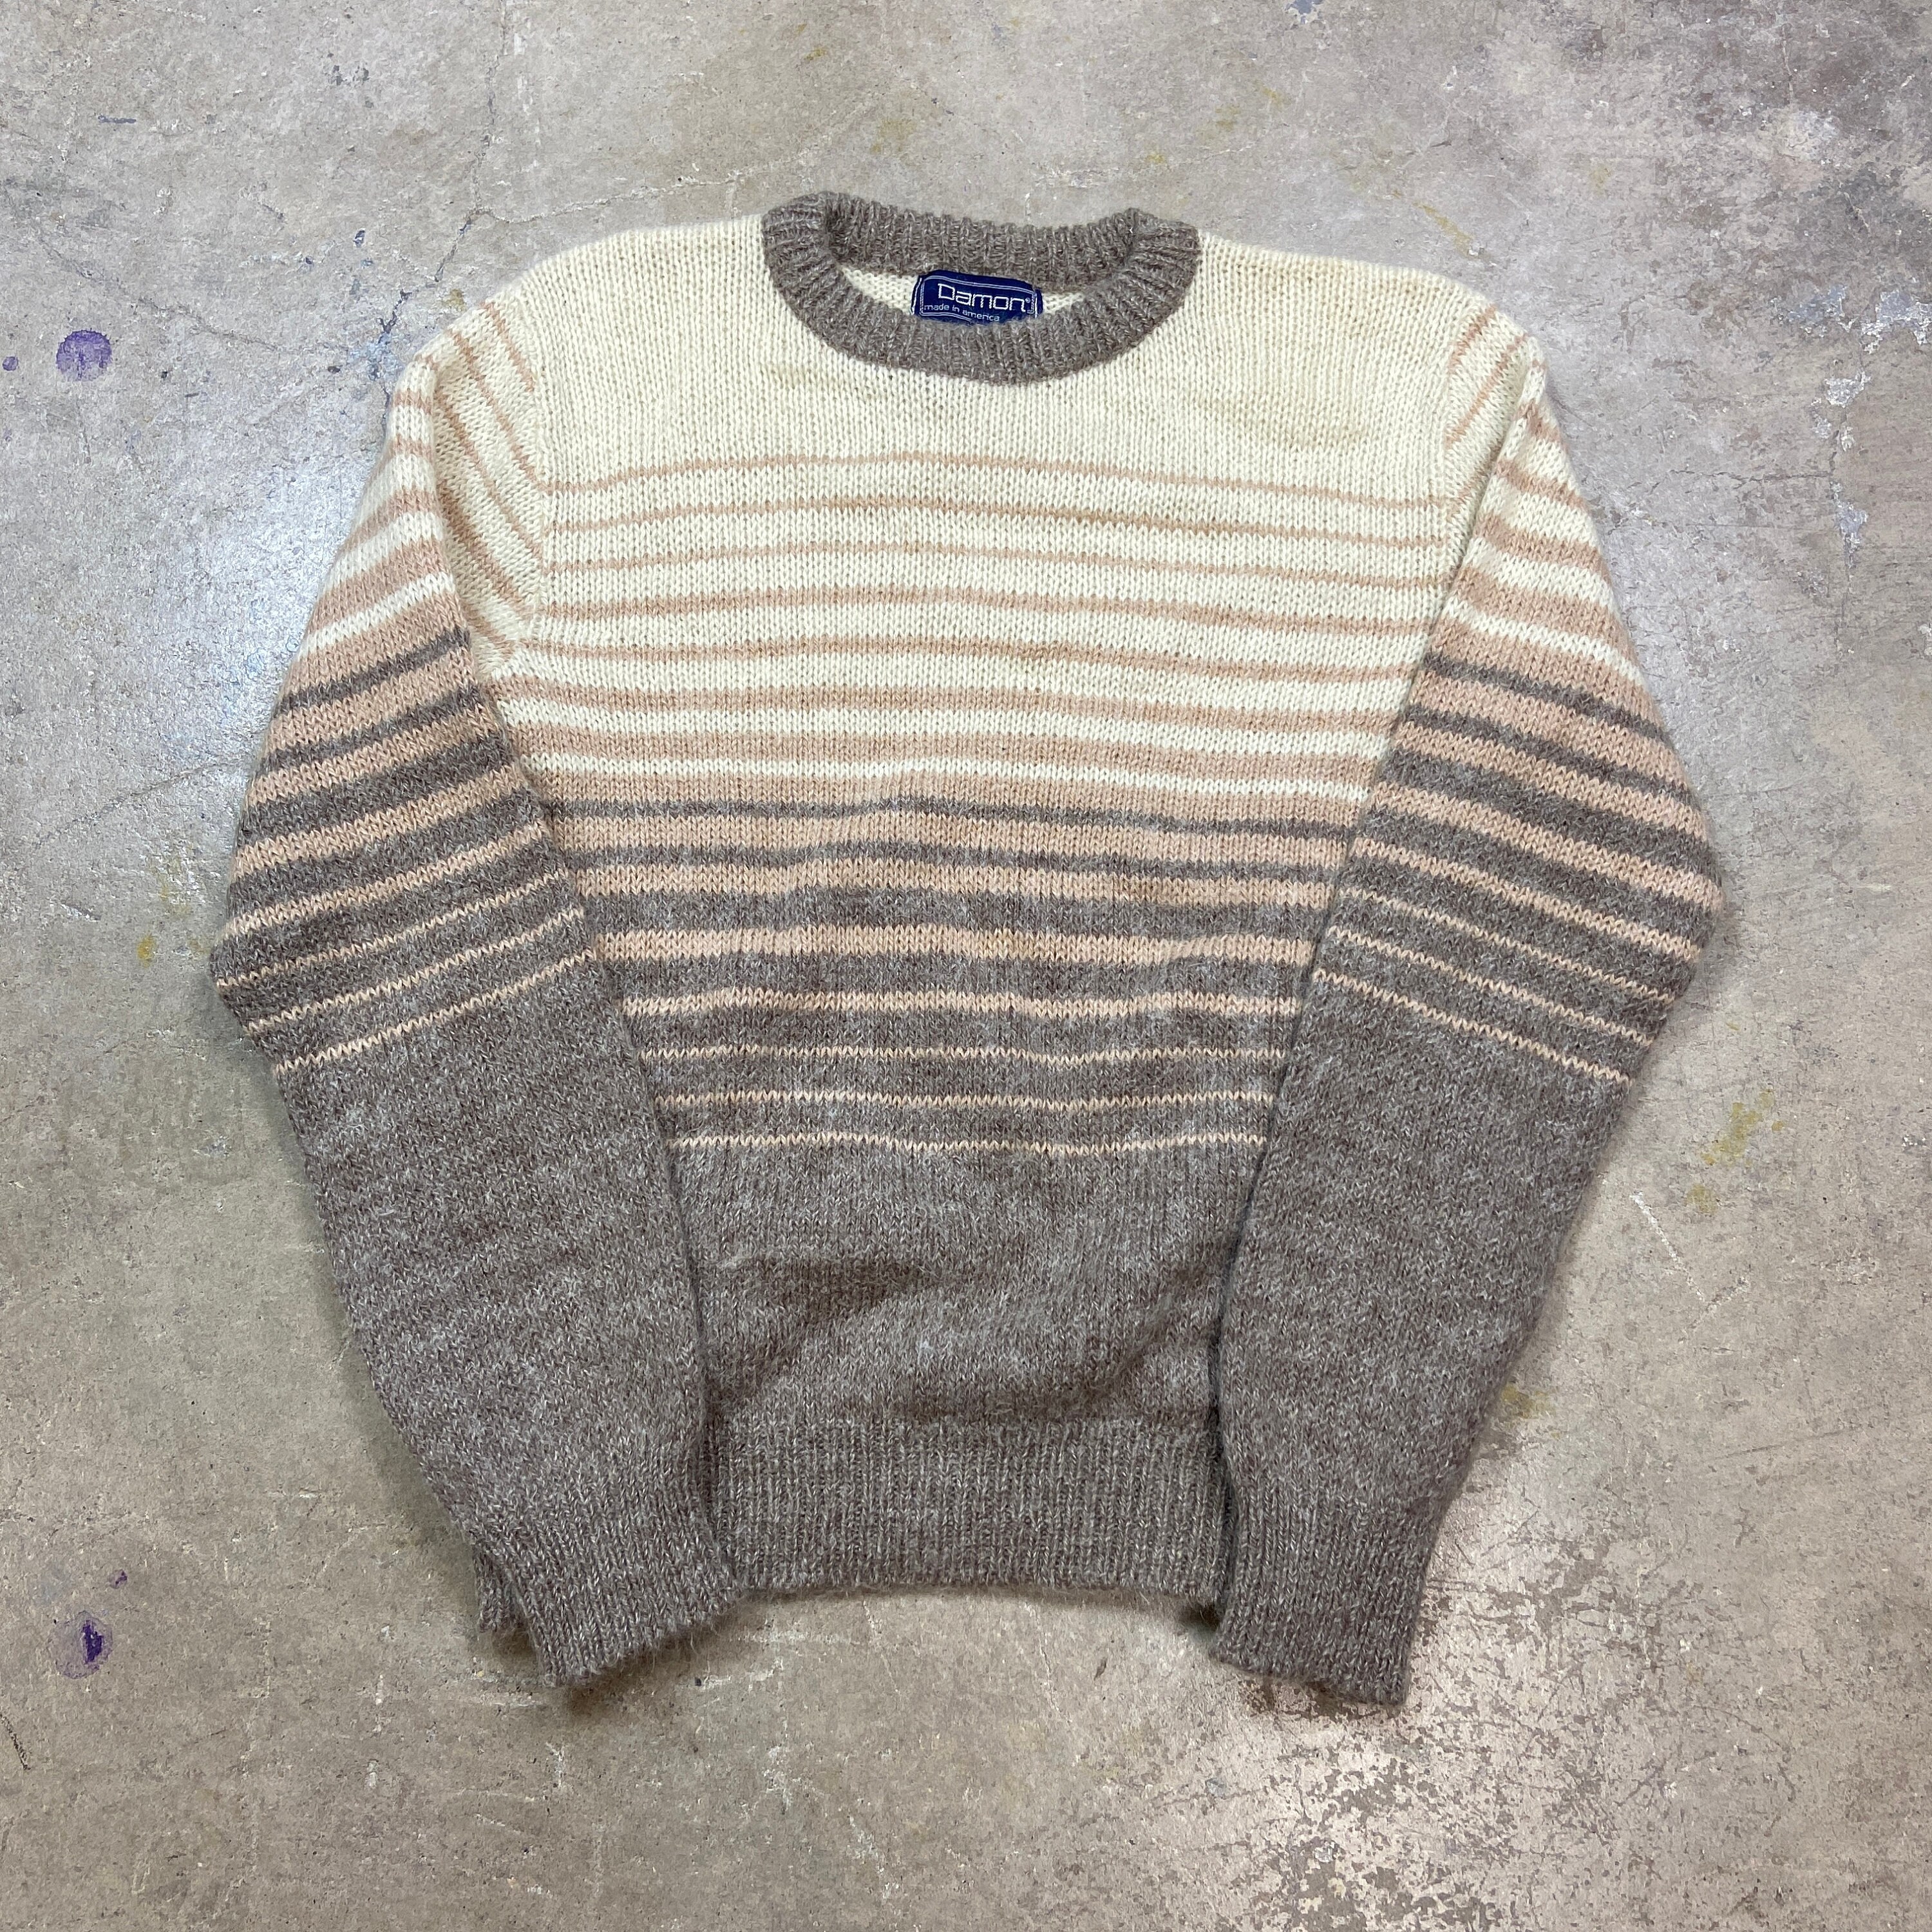 Vintage 1970S Mohair Blend Striped Neutral Sweater Made in Usa - Medium